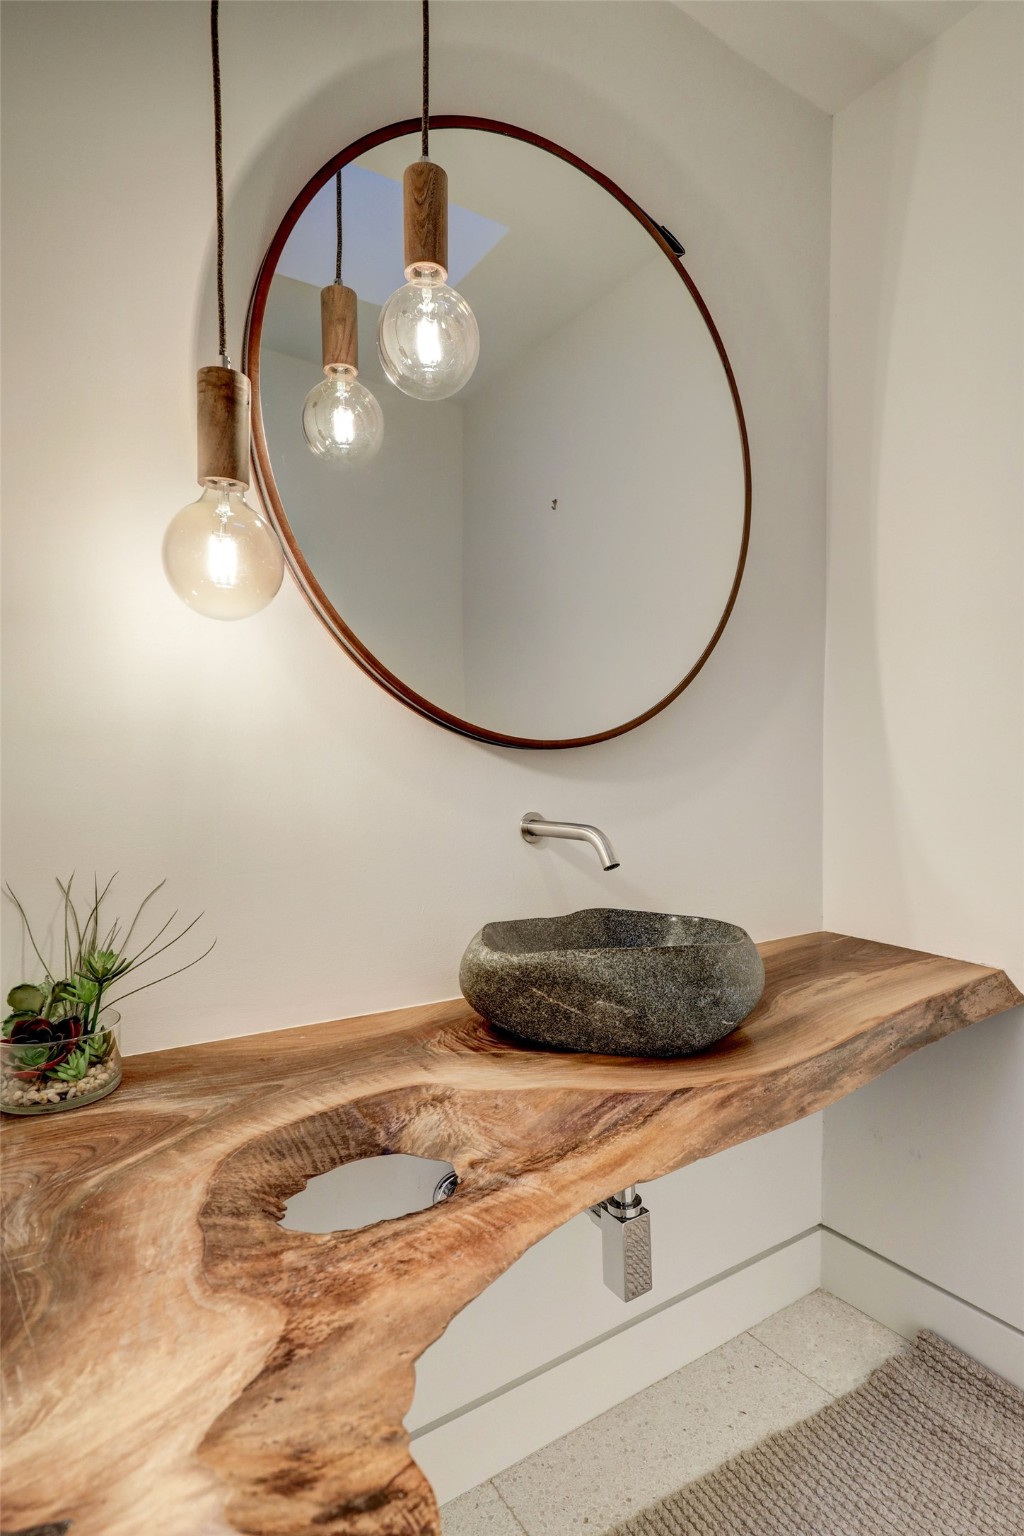 [En Suite Bath / Sink]
A single-piece of wood serves as the sink counter in the en suite bath. Note honed stone sink and wall-mount faucet.